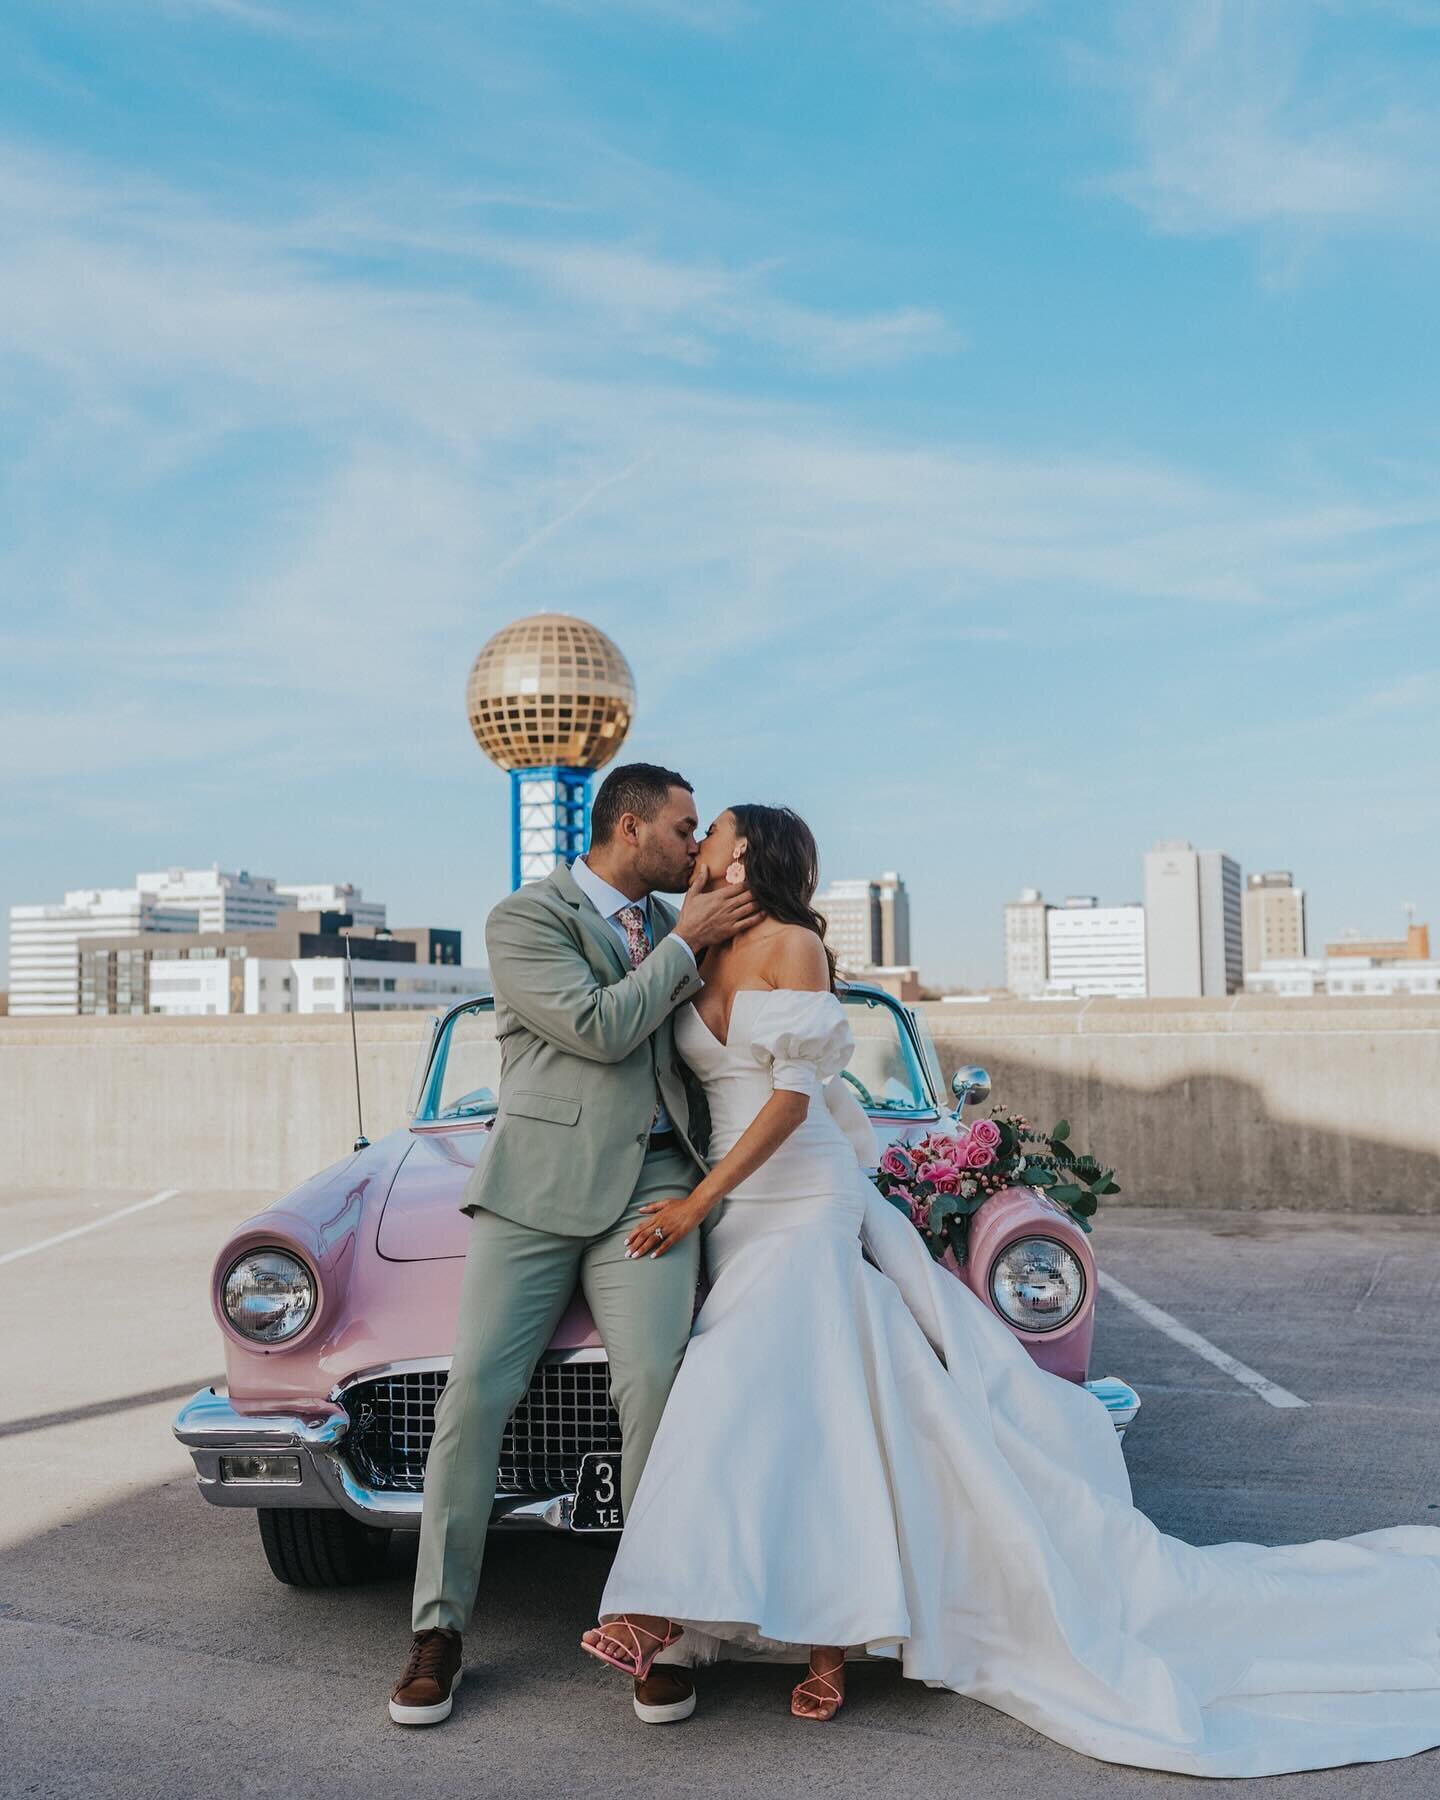 Hi um are you KIDDING ME with these dreamy Knoxville elopement pics!! 🌸😍🩷🌸🌷🎀💖

We&rsquo;ve got pink we&rsquo;ve got Sunsphere we&rsquo;ve got a beautiful couple in love!!!! 

styled by: @creativecontentdays 
models: @_kayleelovell + @ahmad_lov